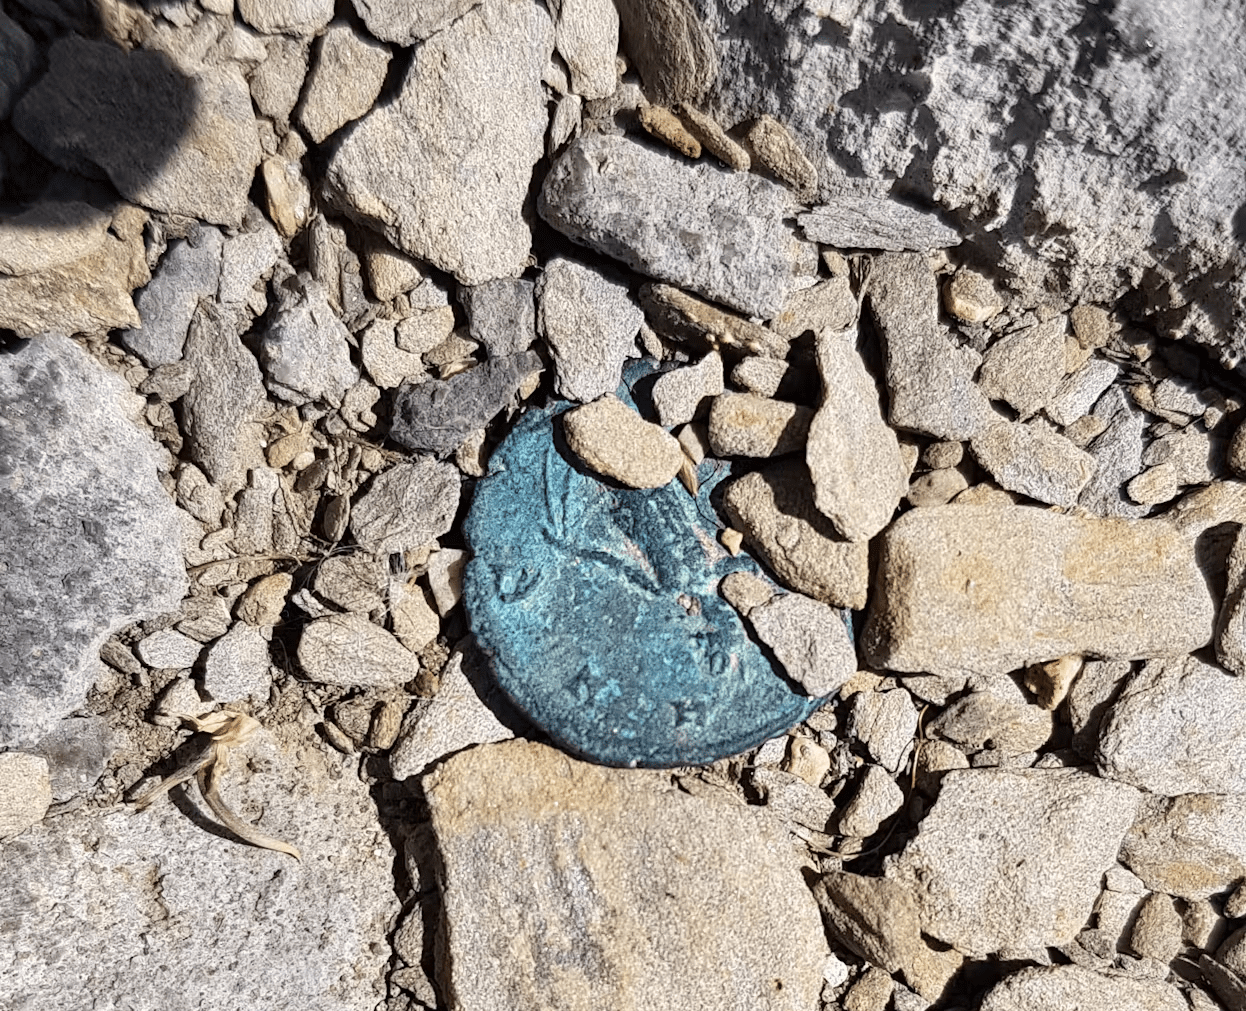 A Roman coin on the site of the excavations.